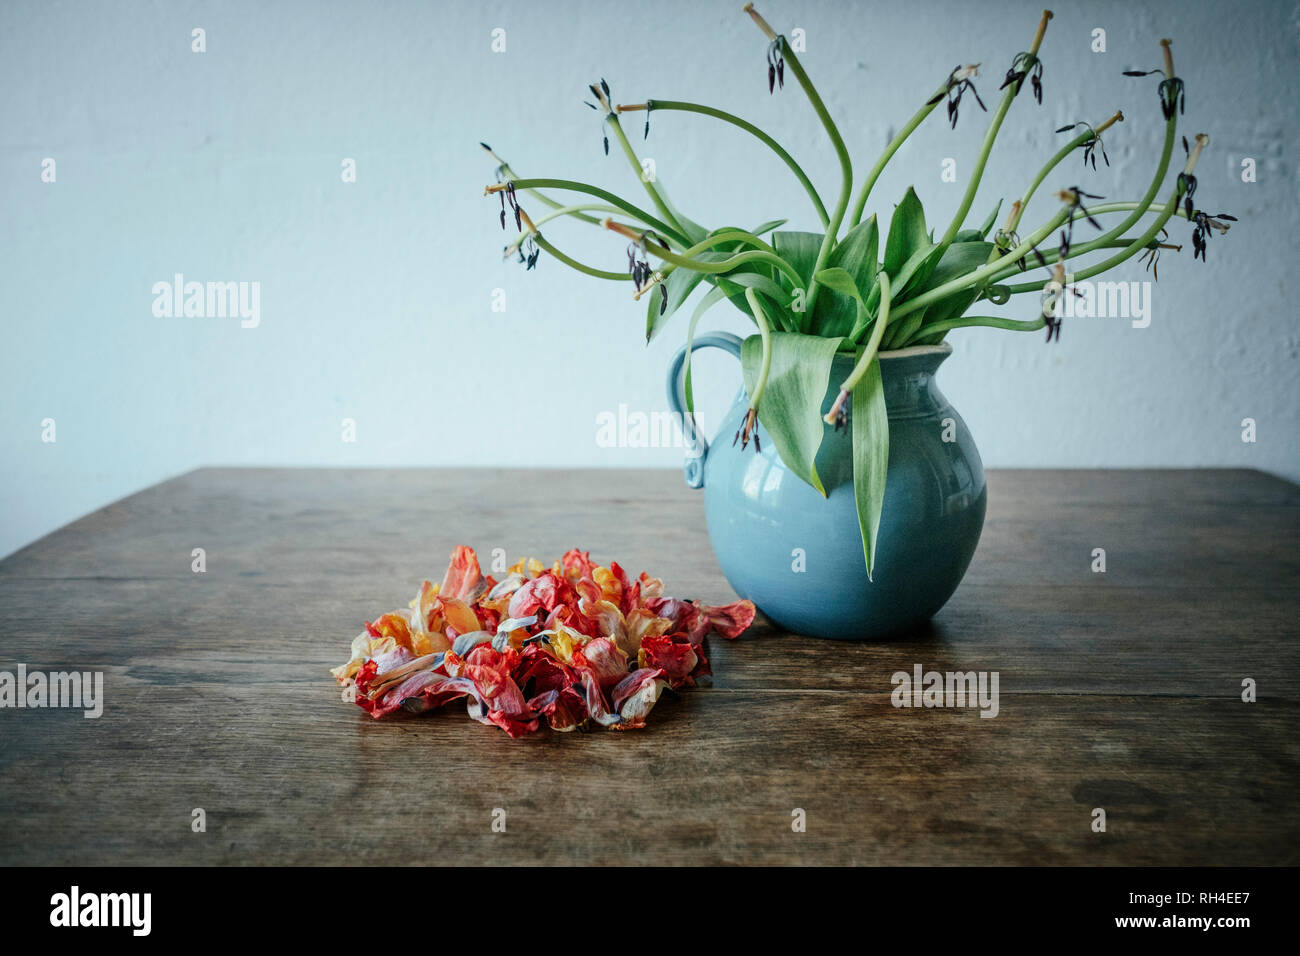 Dead flower petals next to stems in vase Stock Photo